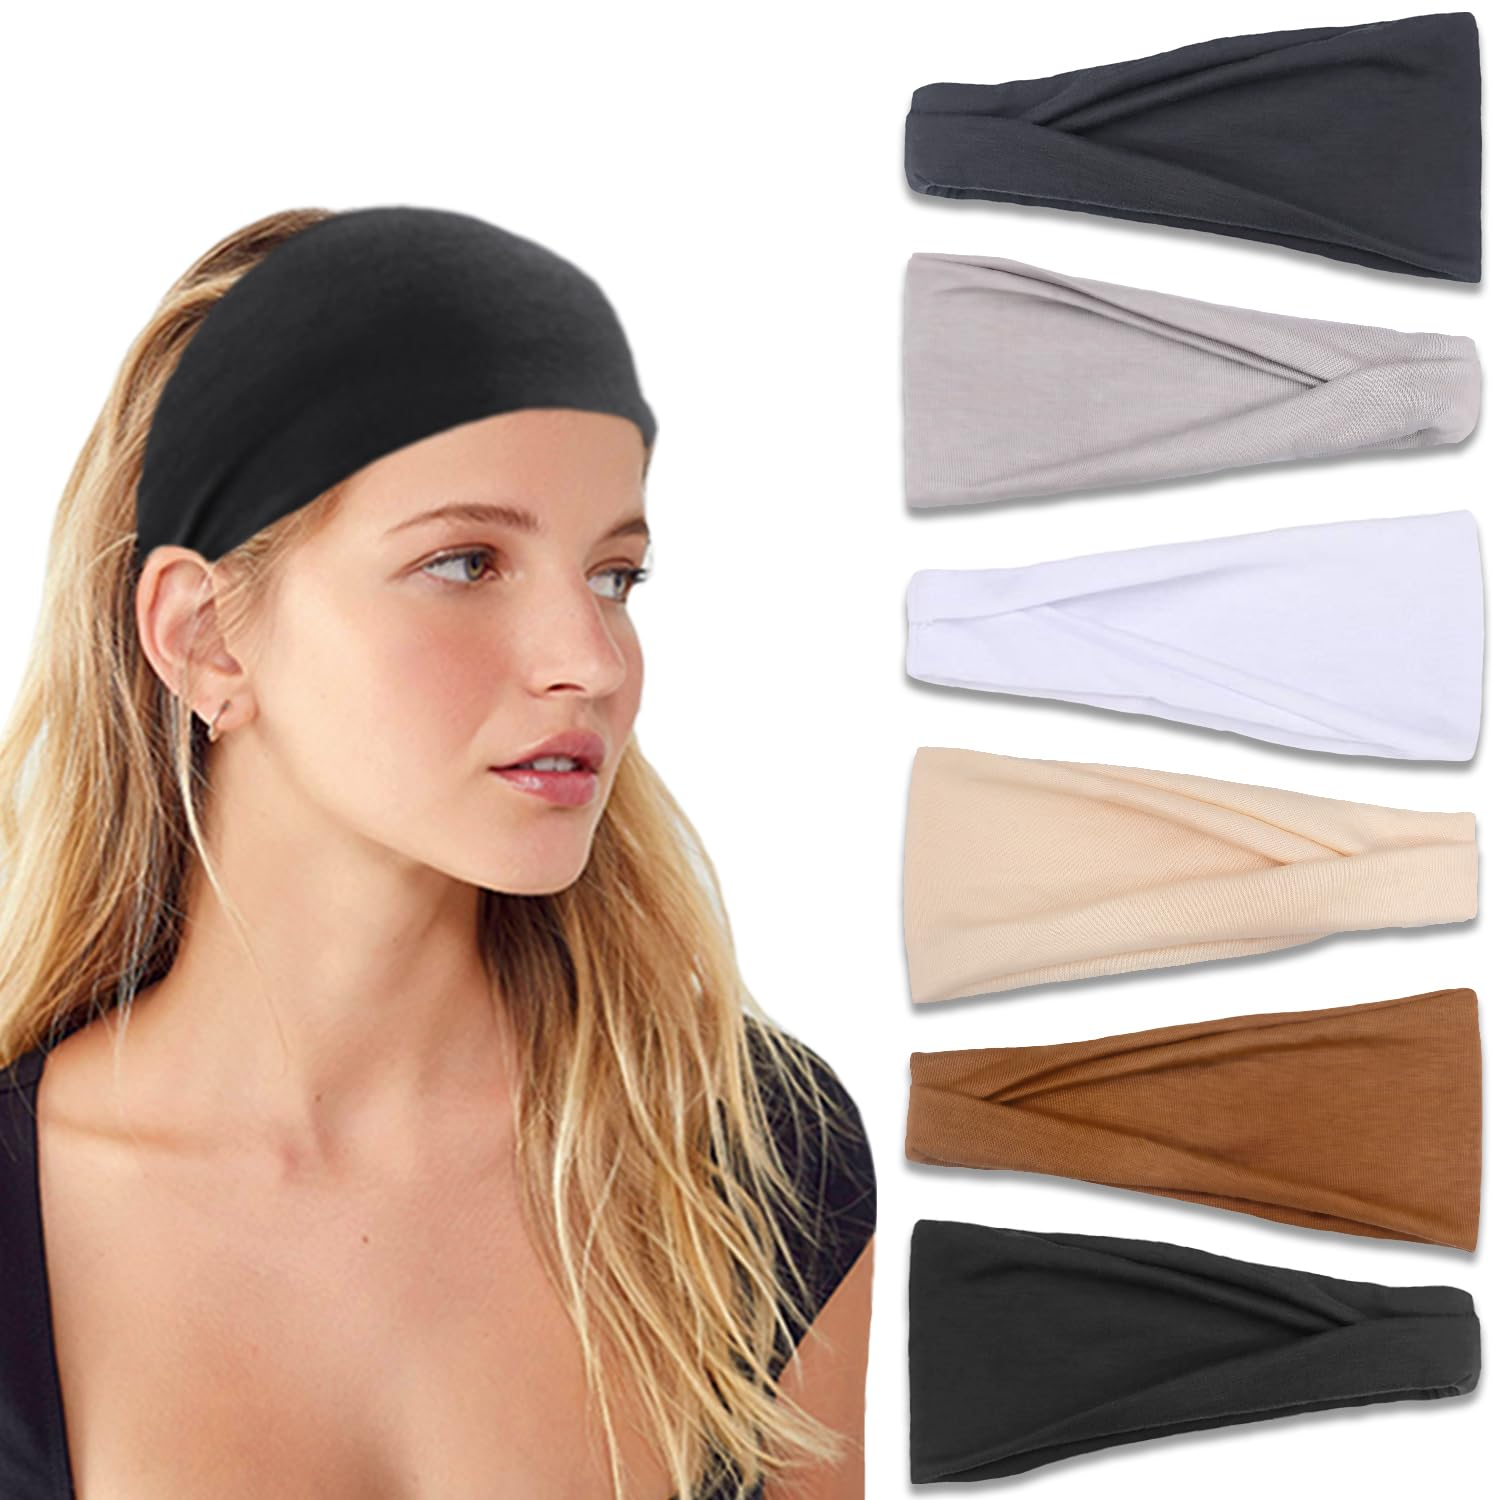 Headbands for Women Premium Stretchy Head Bands Hair Accessories